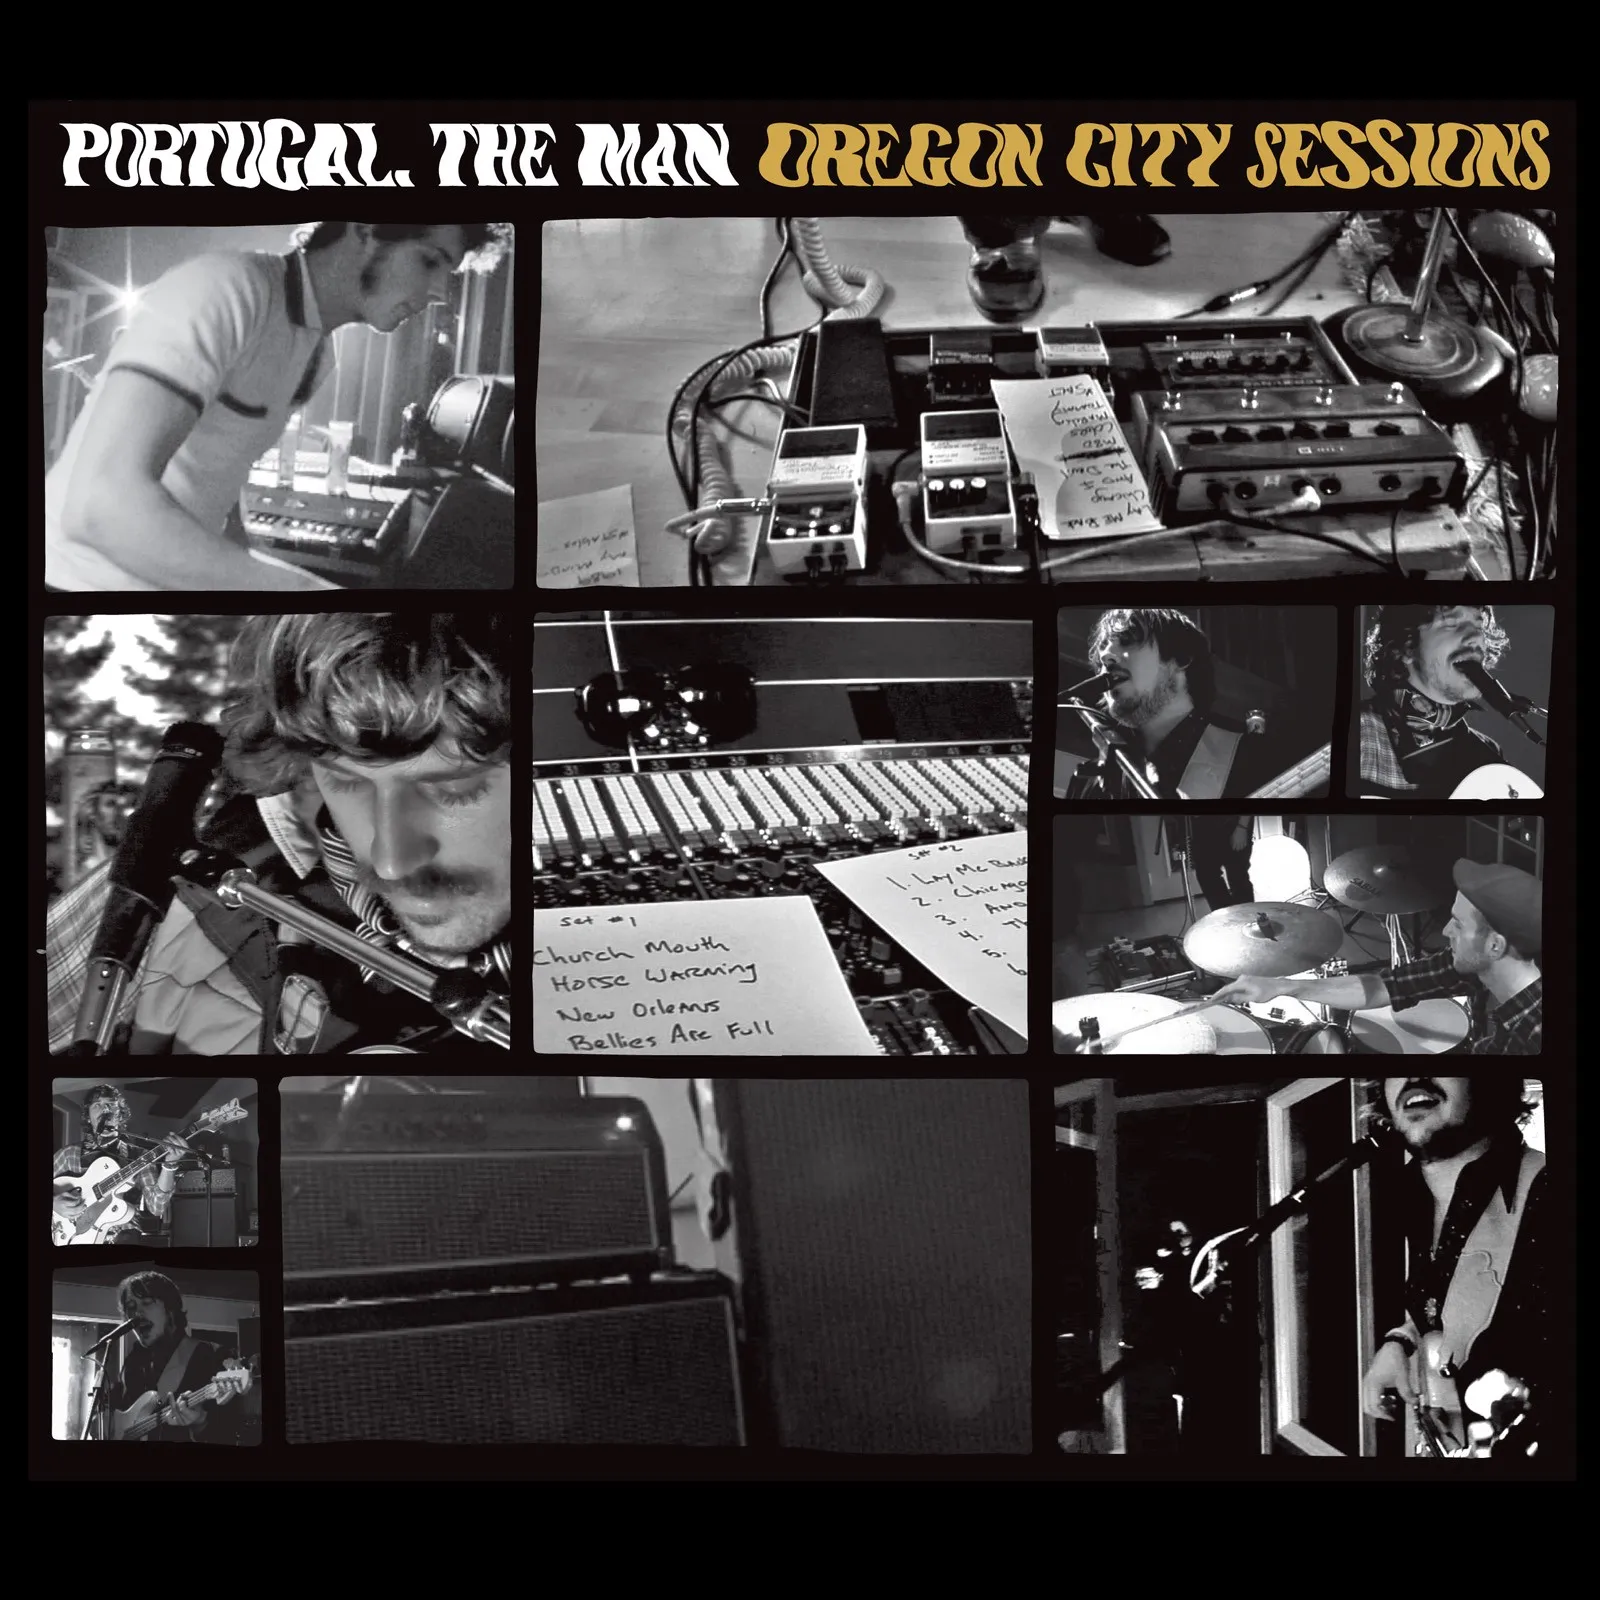 <strong>Portugal. The Man - Oregon City Sessions</strong> (Vinyl LP - black)